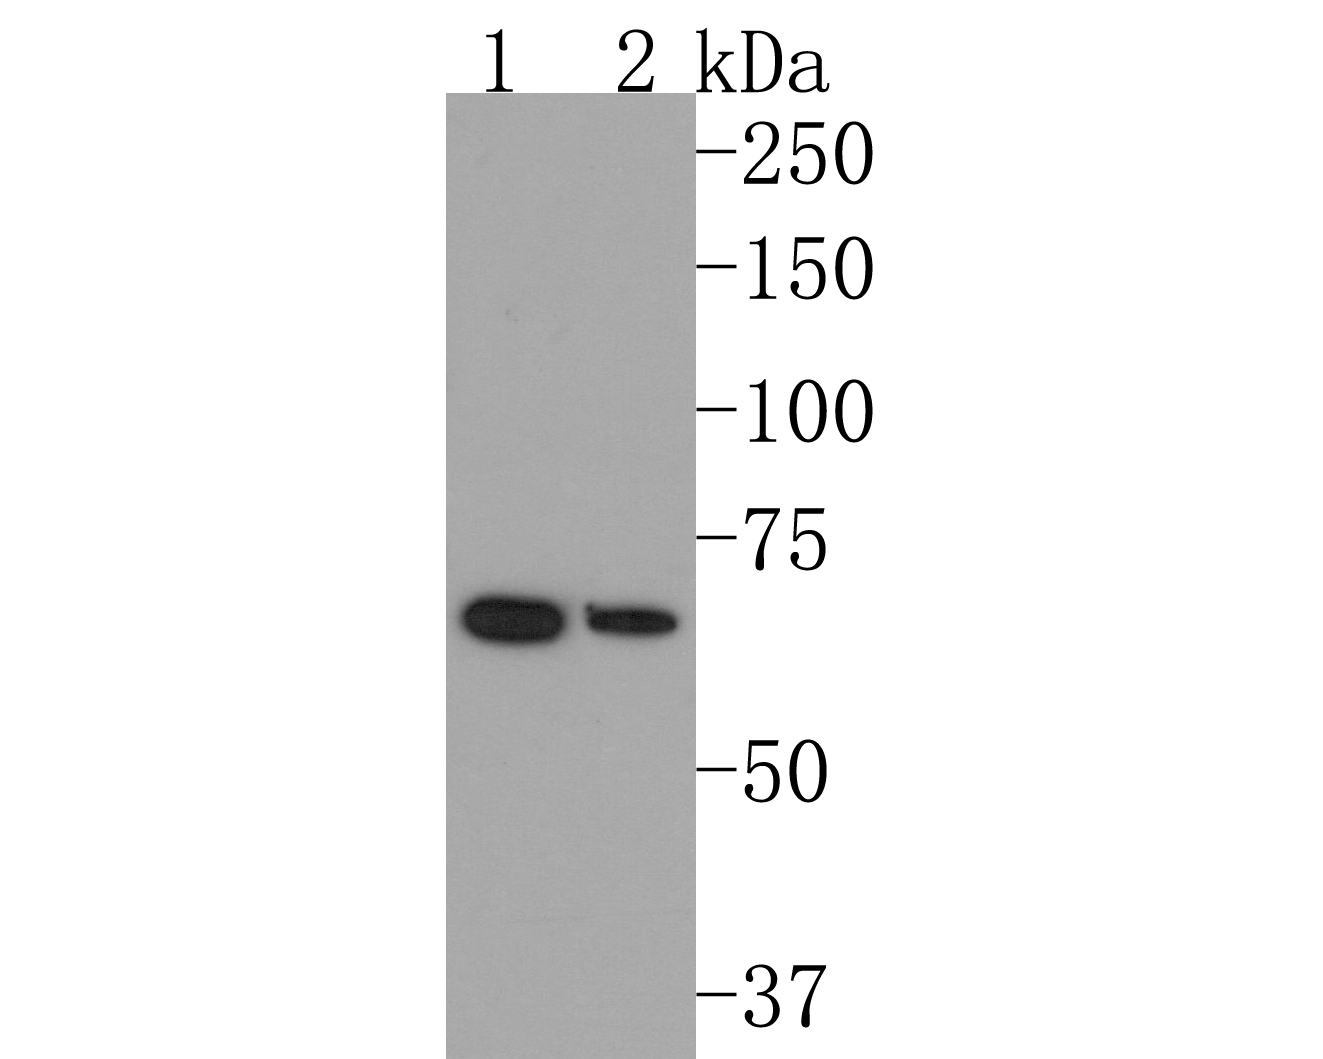 Western blot analysis of RAD18 on different lysates. Proteins were transferred to a PVDF membrane and blocked with 5% BSA in PBS for 1 hour at room temperature. The primary antibody (ET1611-32, 1/500) was used in 5% BSA at room temperature for 2 hours. Goat Anti-Rabbit IgG - HRP Secondary Antibody (HA1001) at 1:200,000 dilution was used for 1 hour at room temperature.<br />
Positive control: <br />
Lane 1: NIH/3T3 cell lysate<br />
Lane 2: MCF-7 cell lysate